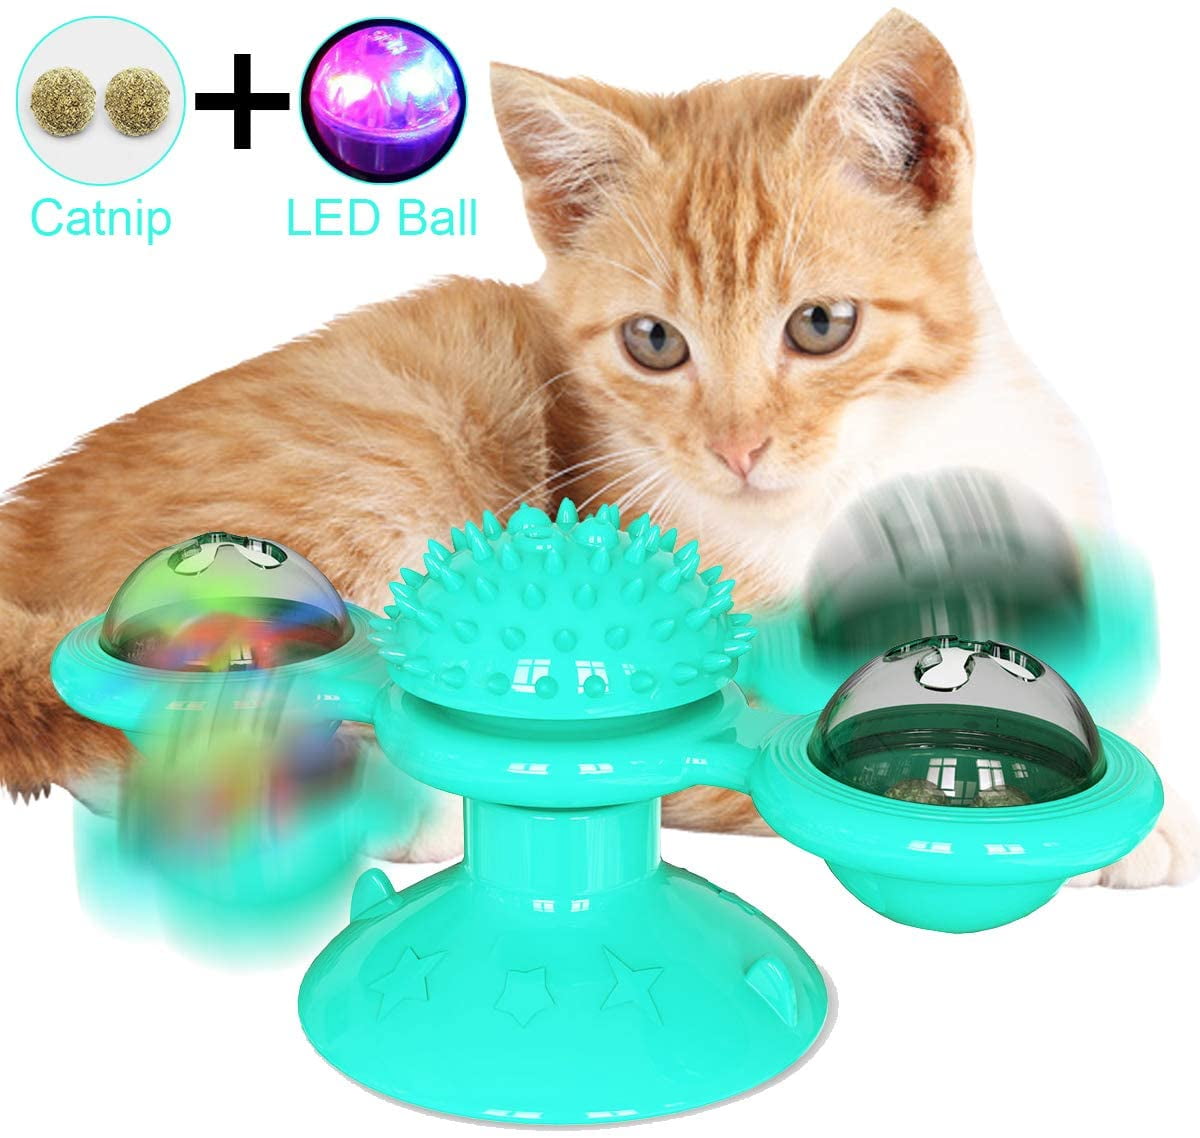 LIGHTSMAX Windmill Cat Toy Turntable Teasing Interactive Cat Toys for